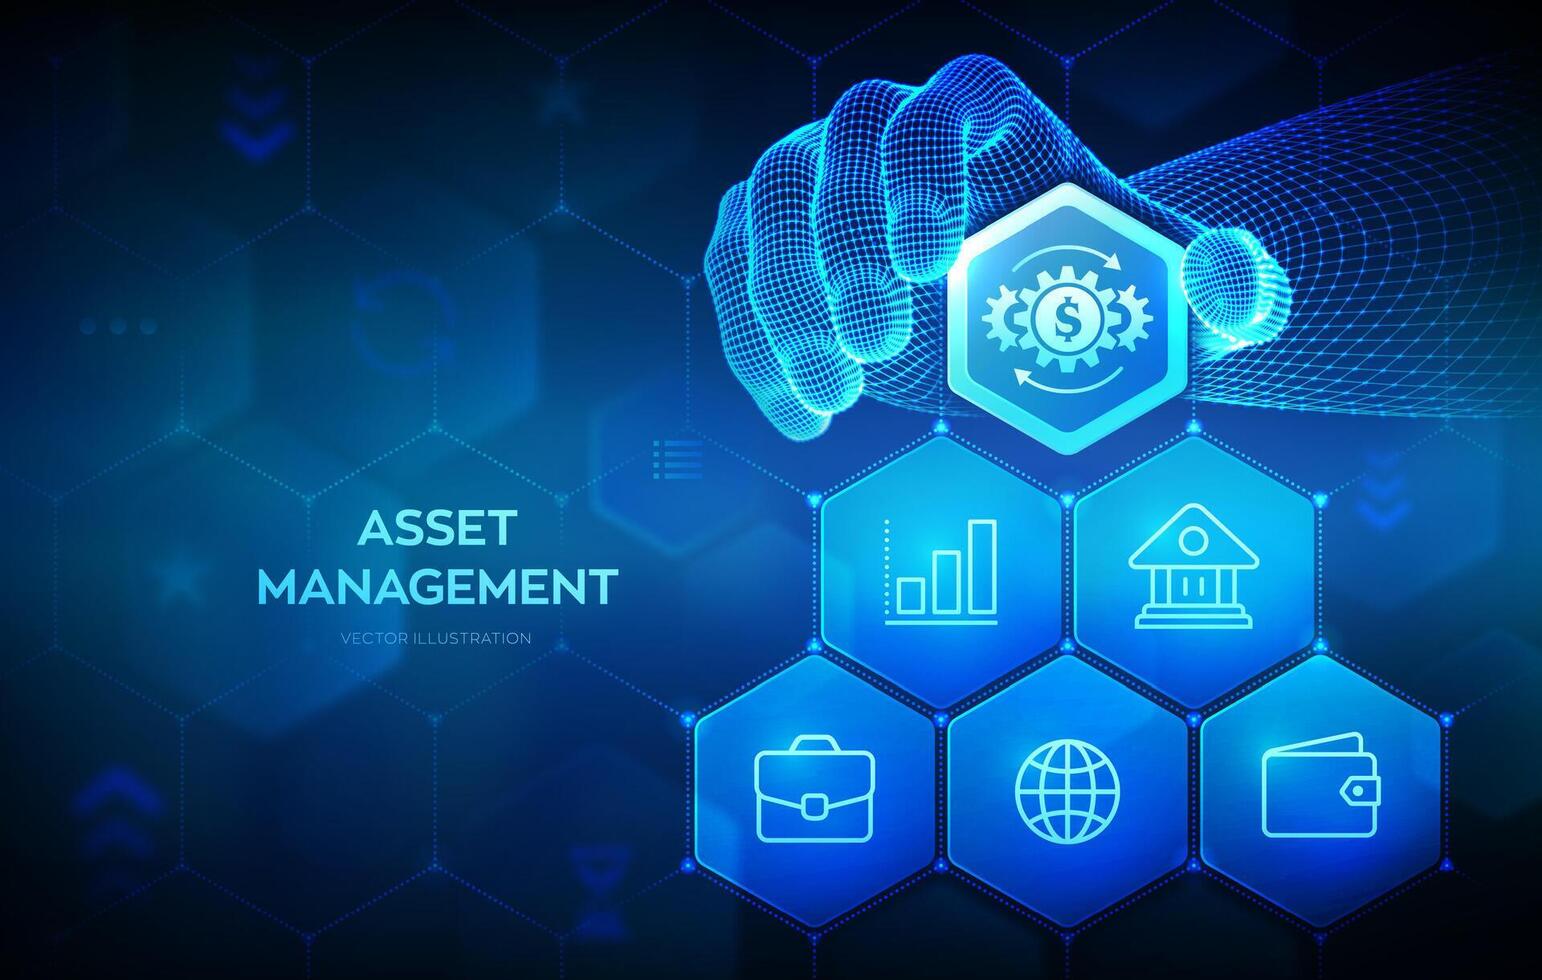 Asset management. Business investment banking payment technology concept on virutal screen. Wireframe hand places an element into a composition visualizing Asset management. Vector illustration.